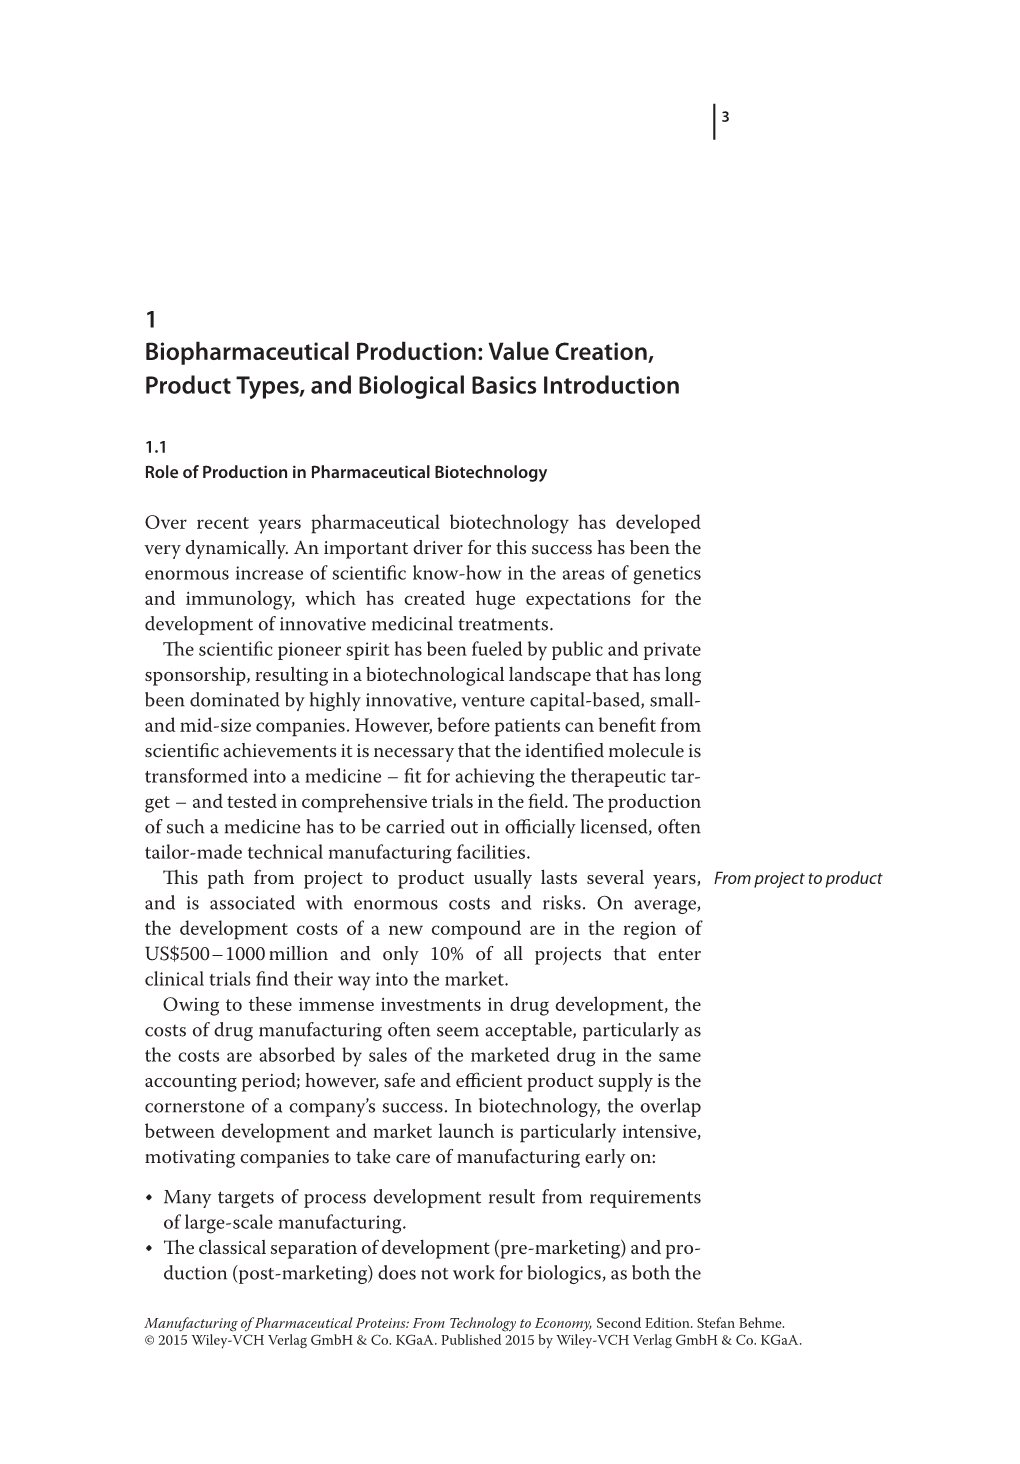 Value Creation, Product Types, and Biological Basics Introduction